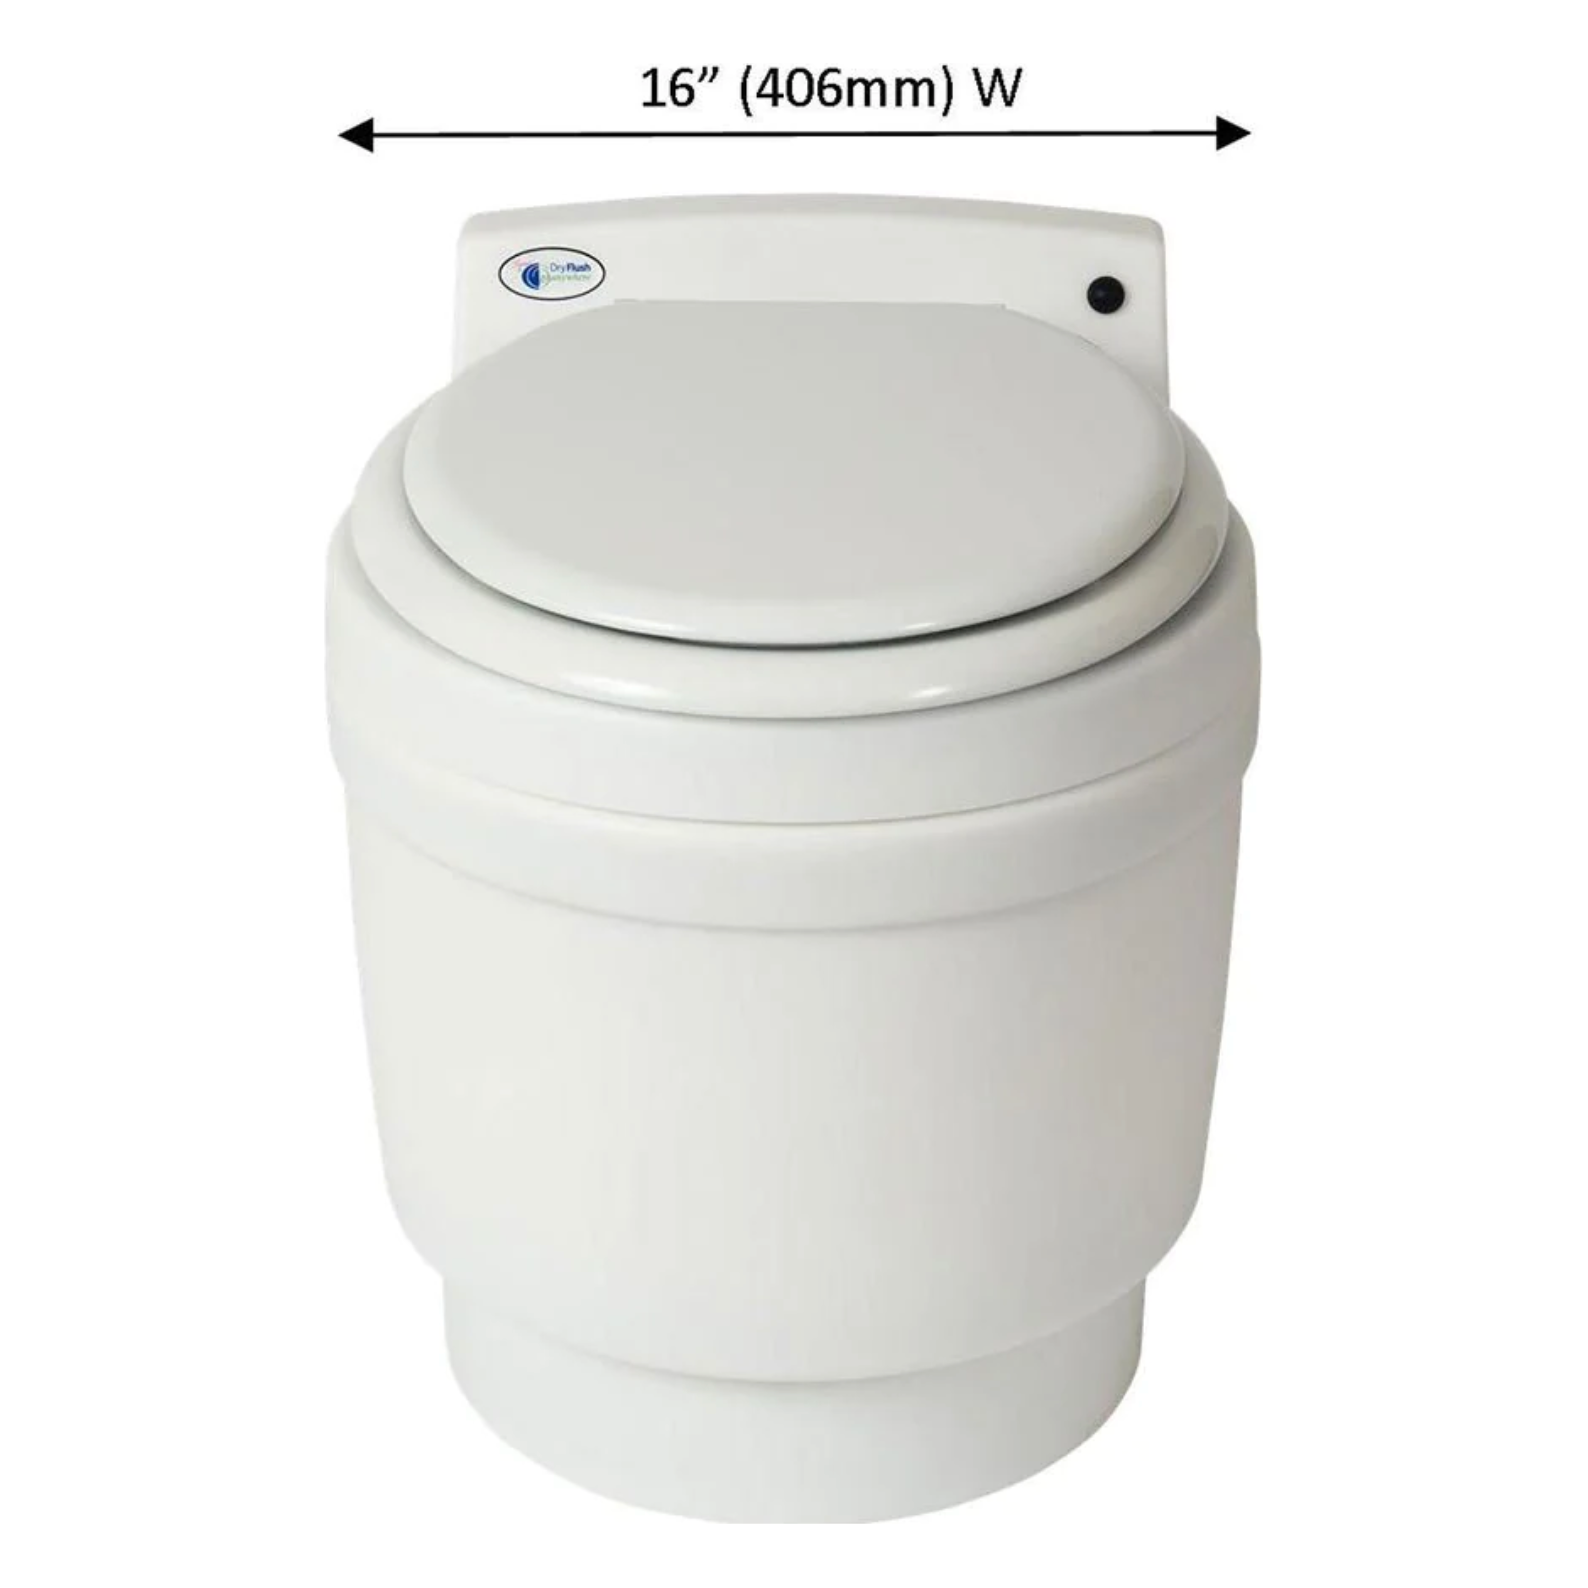 Laveo Dry Flush Portable Electric Waterless Toilet with Battery & Charger DF1045